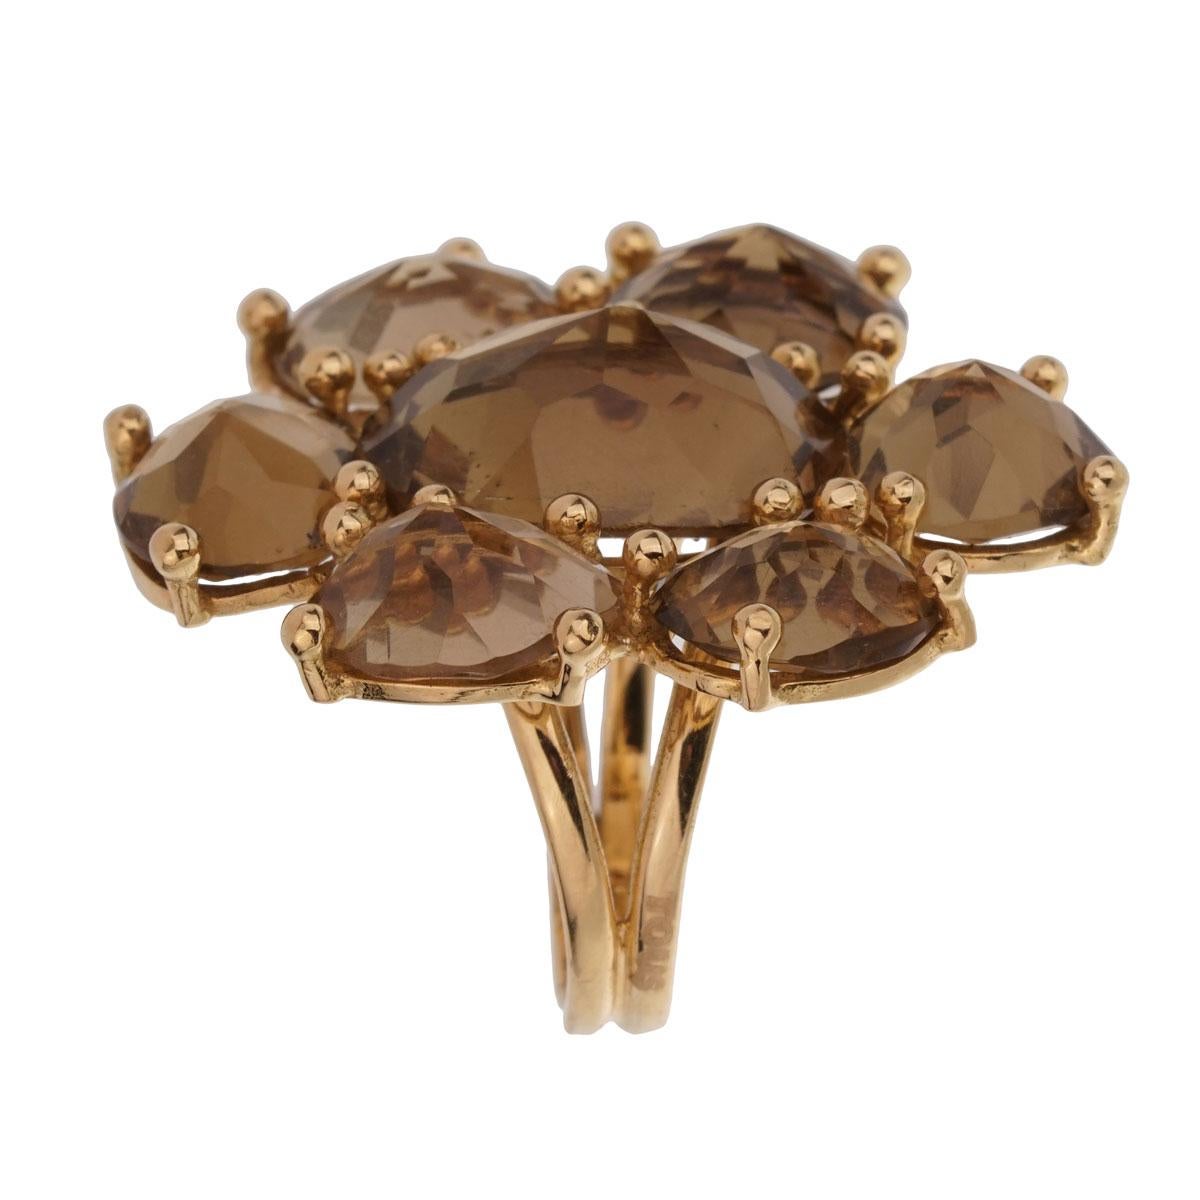 A very chic Tous ring featuring 7 Smokey Quartz stones inversely set to create a one of kind design in 18k yellow gold. The ring measures a size 6 1/2 and can be resized.

Sku: 1943